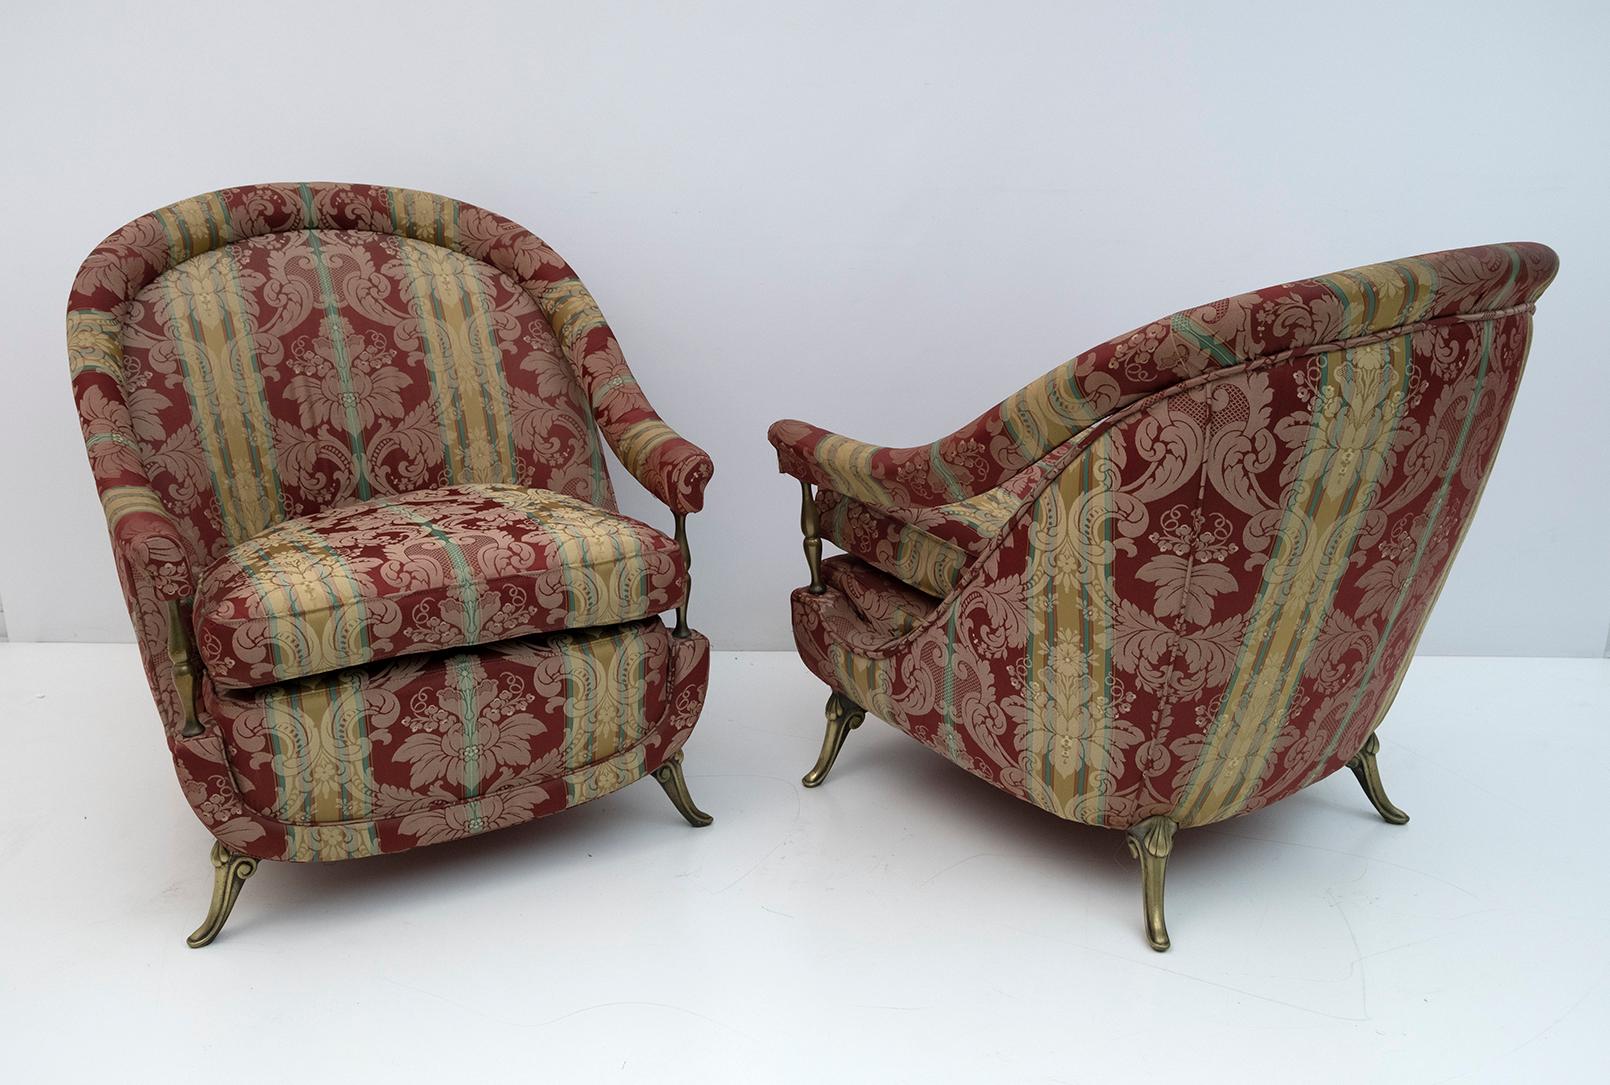 Pair of neoclassical style armchairs, with feet and columns to support the armrests, in brass. The upholstery was redone twenty years ago but is worn and stained, a new upholstery is recommended. Italian production of the 1950s.

The price refers